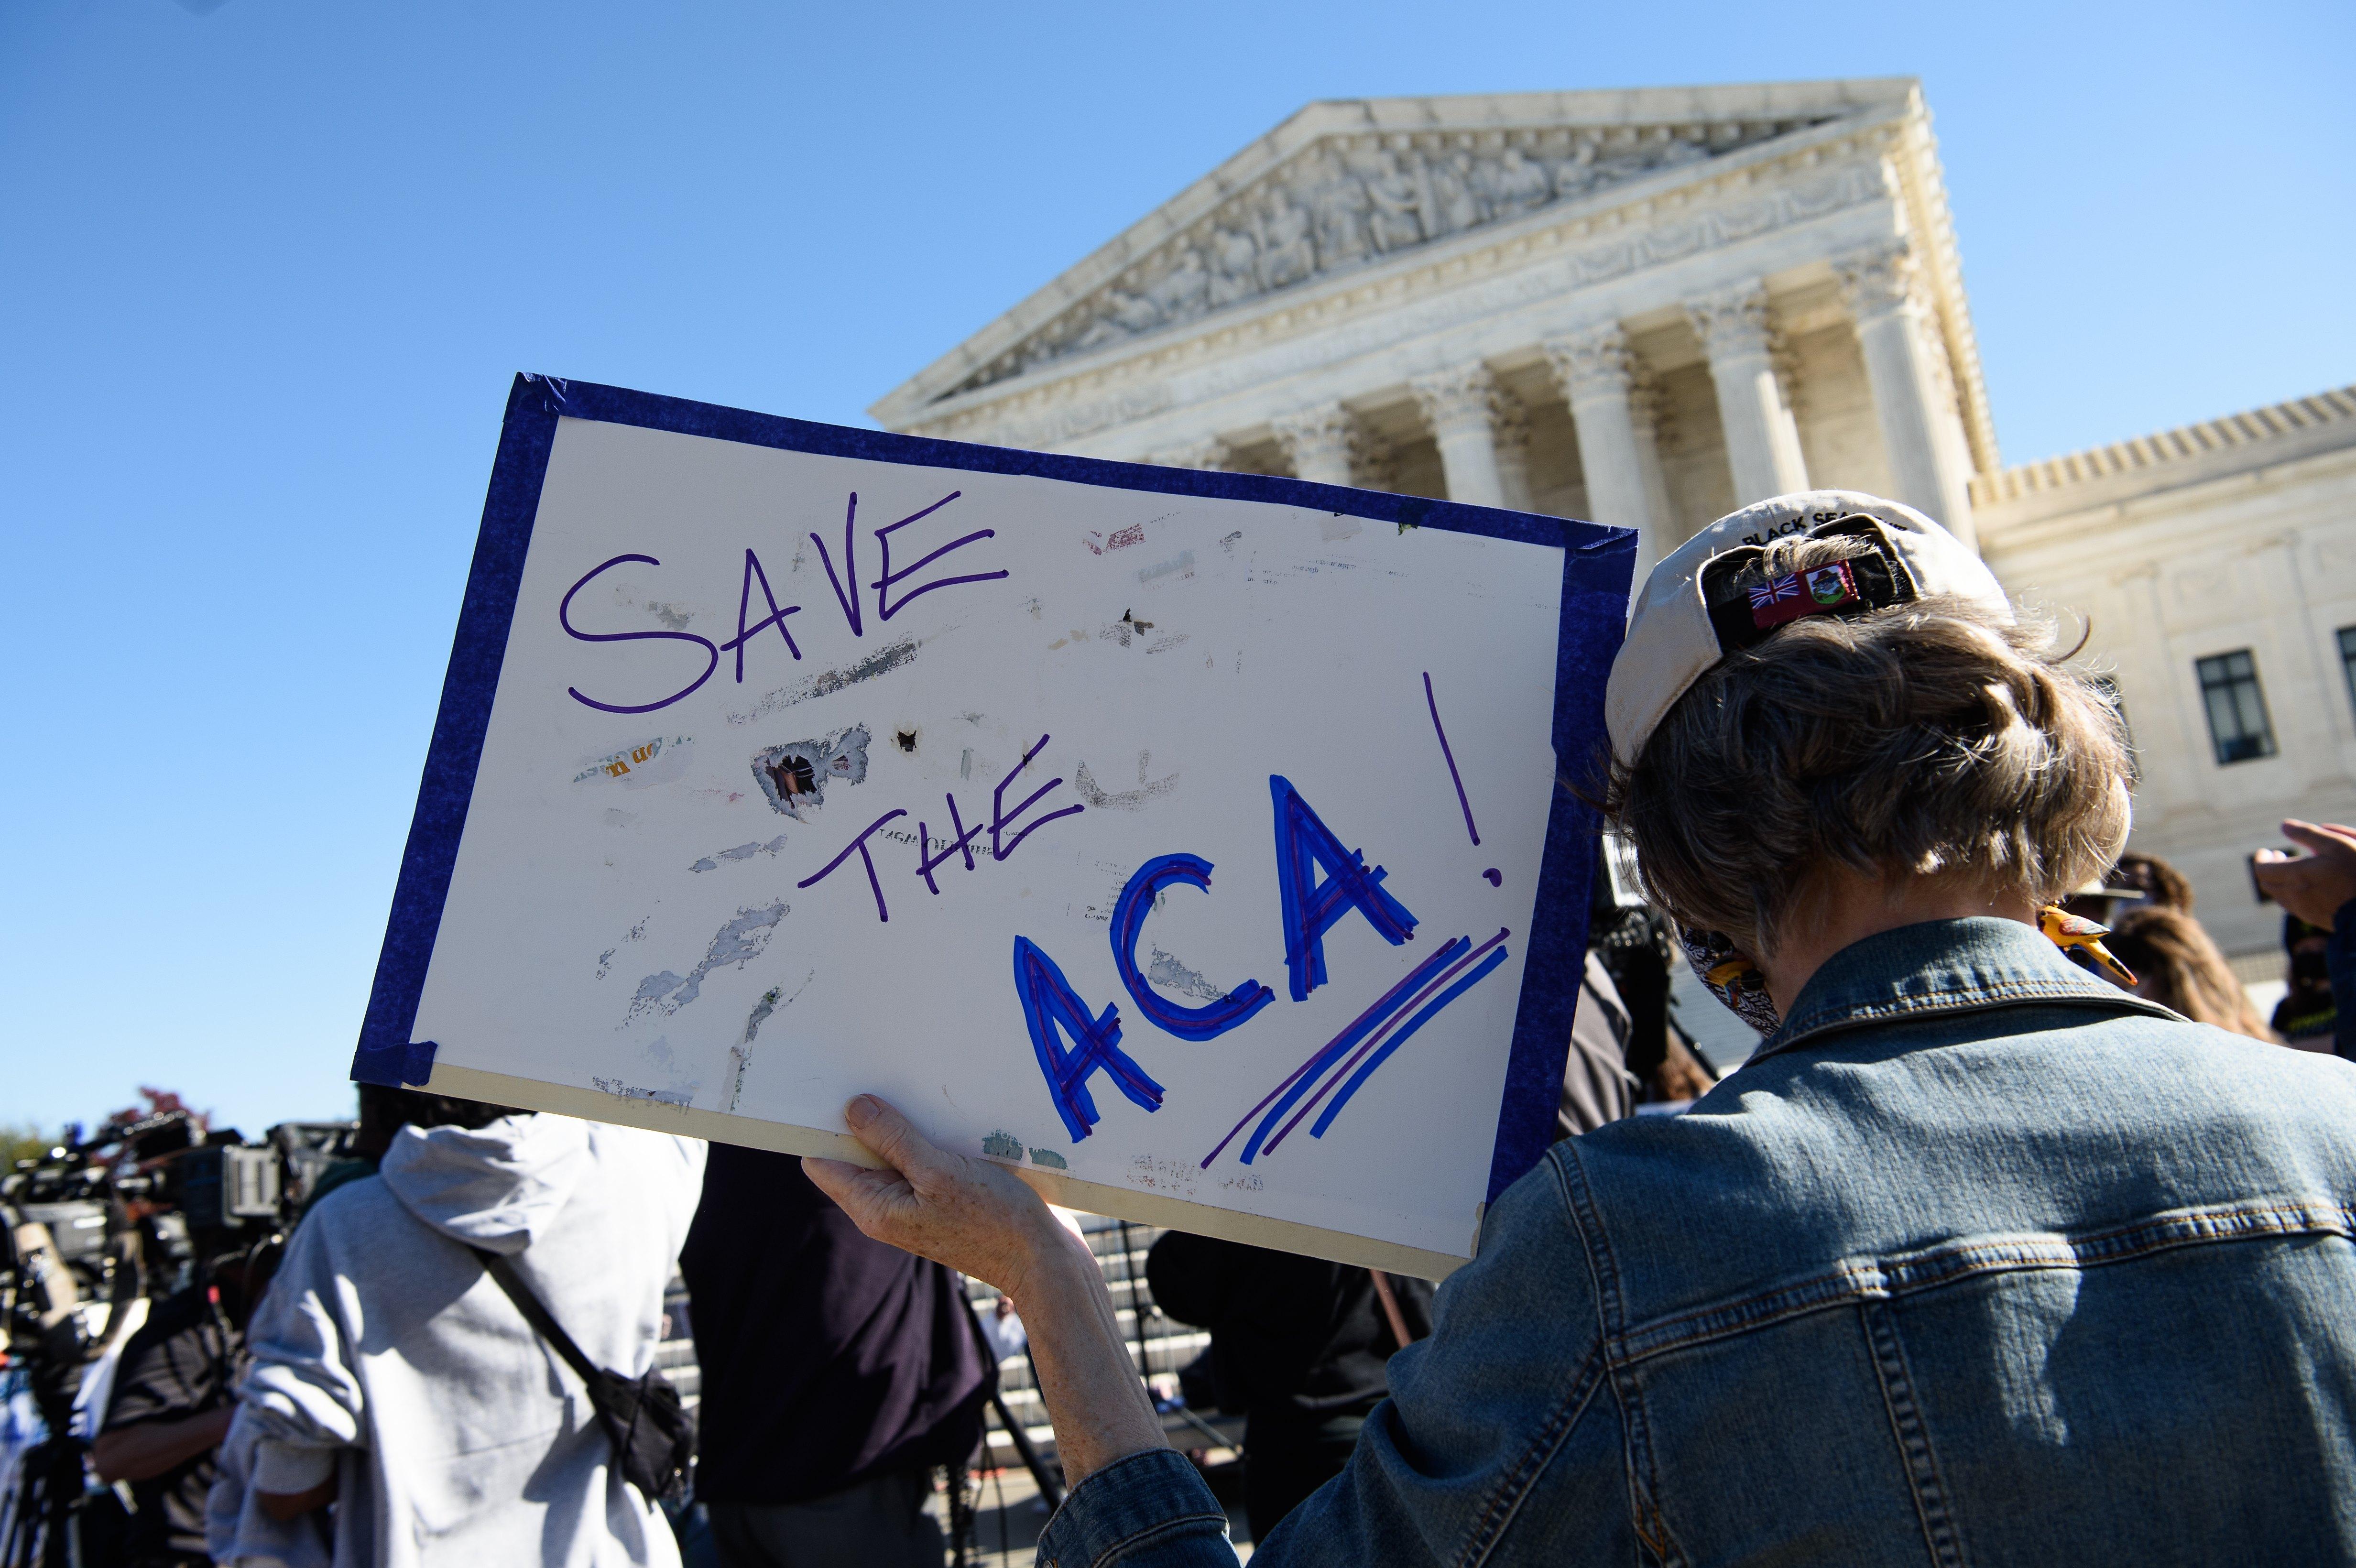 A demonstrator holds a sign in front of the US Supreme Court that says "Save the ACA."